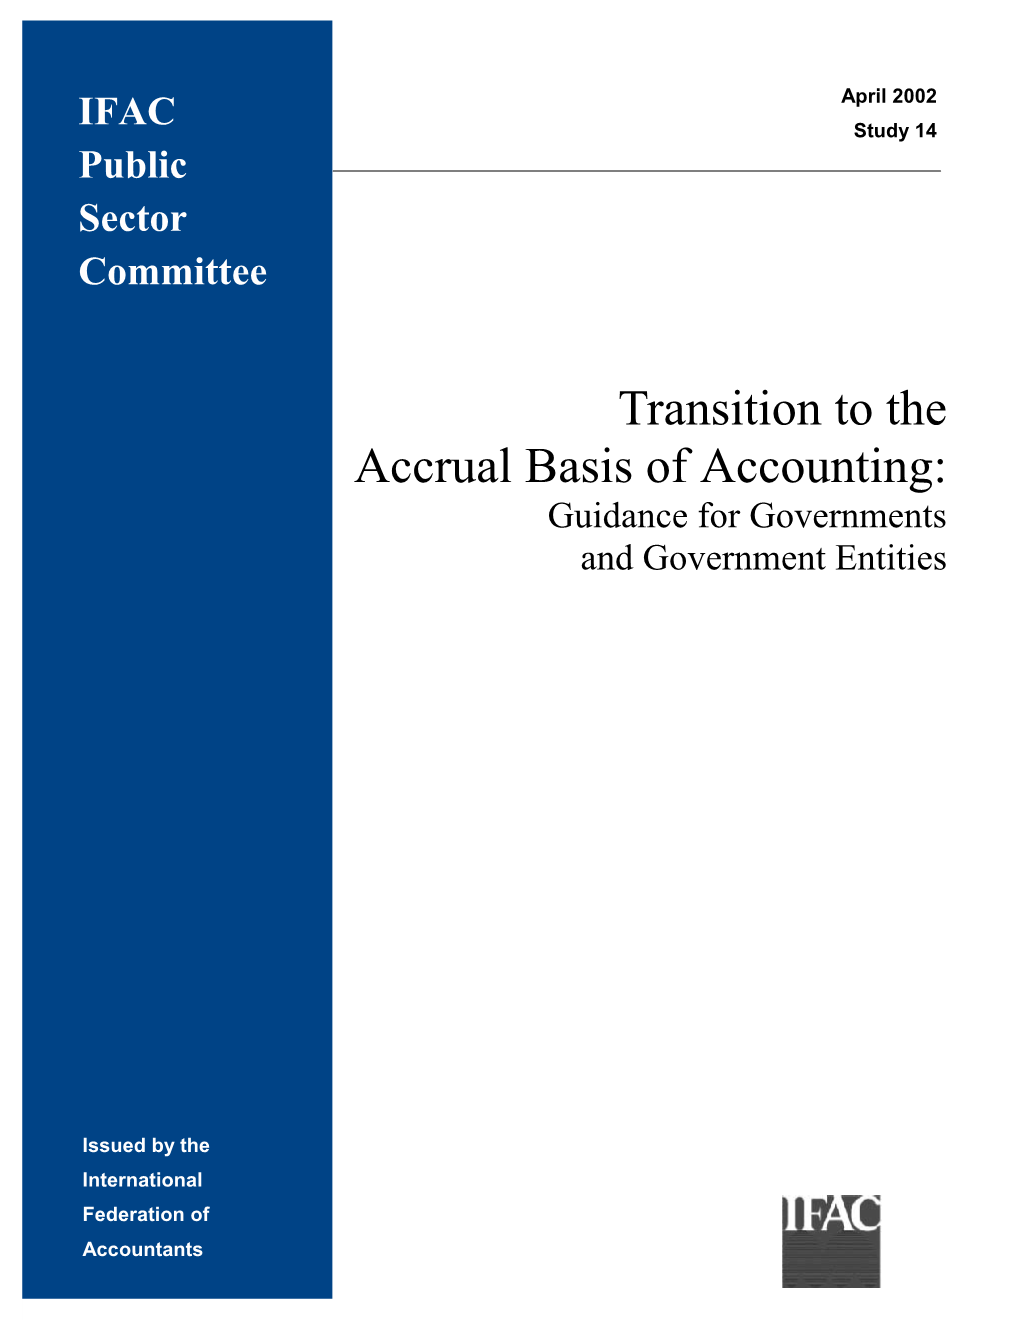 Transition to the Accrual Basis of Accounting, Public Sector Committee